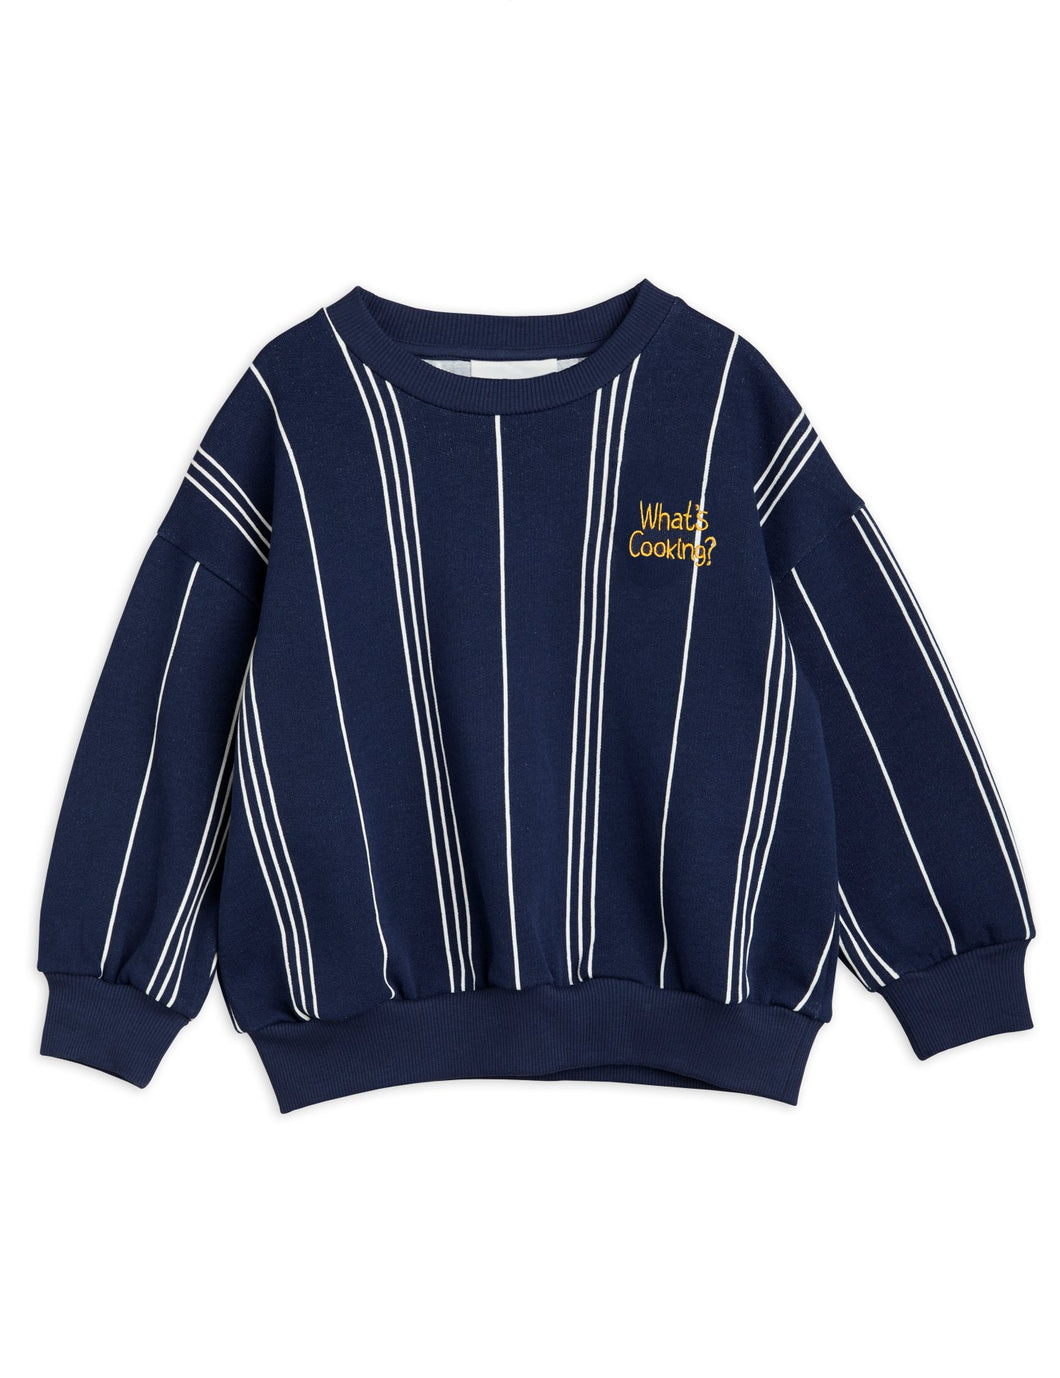 What's Cooking Embroidered Sweatshirt - Navy